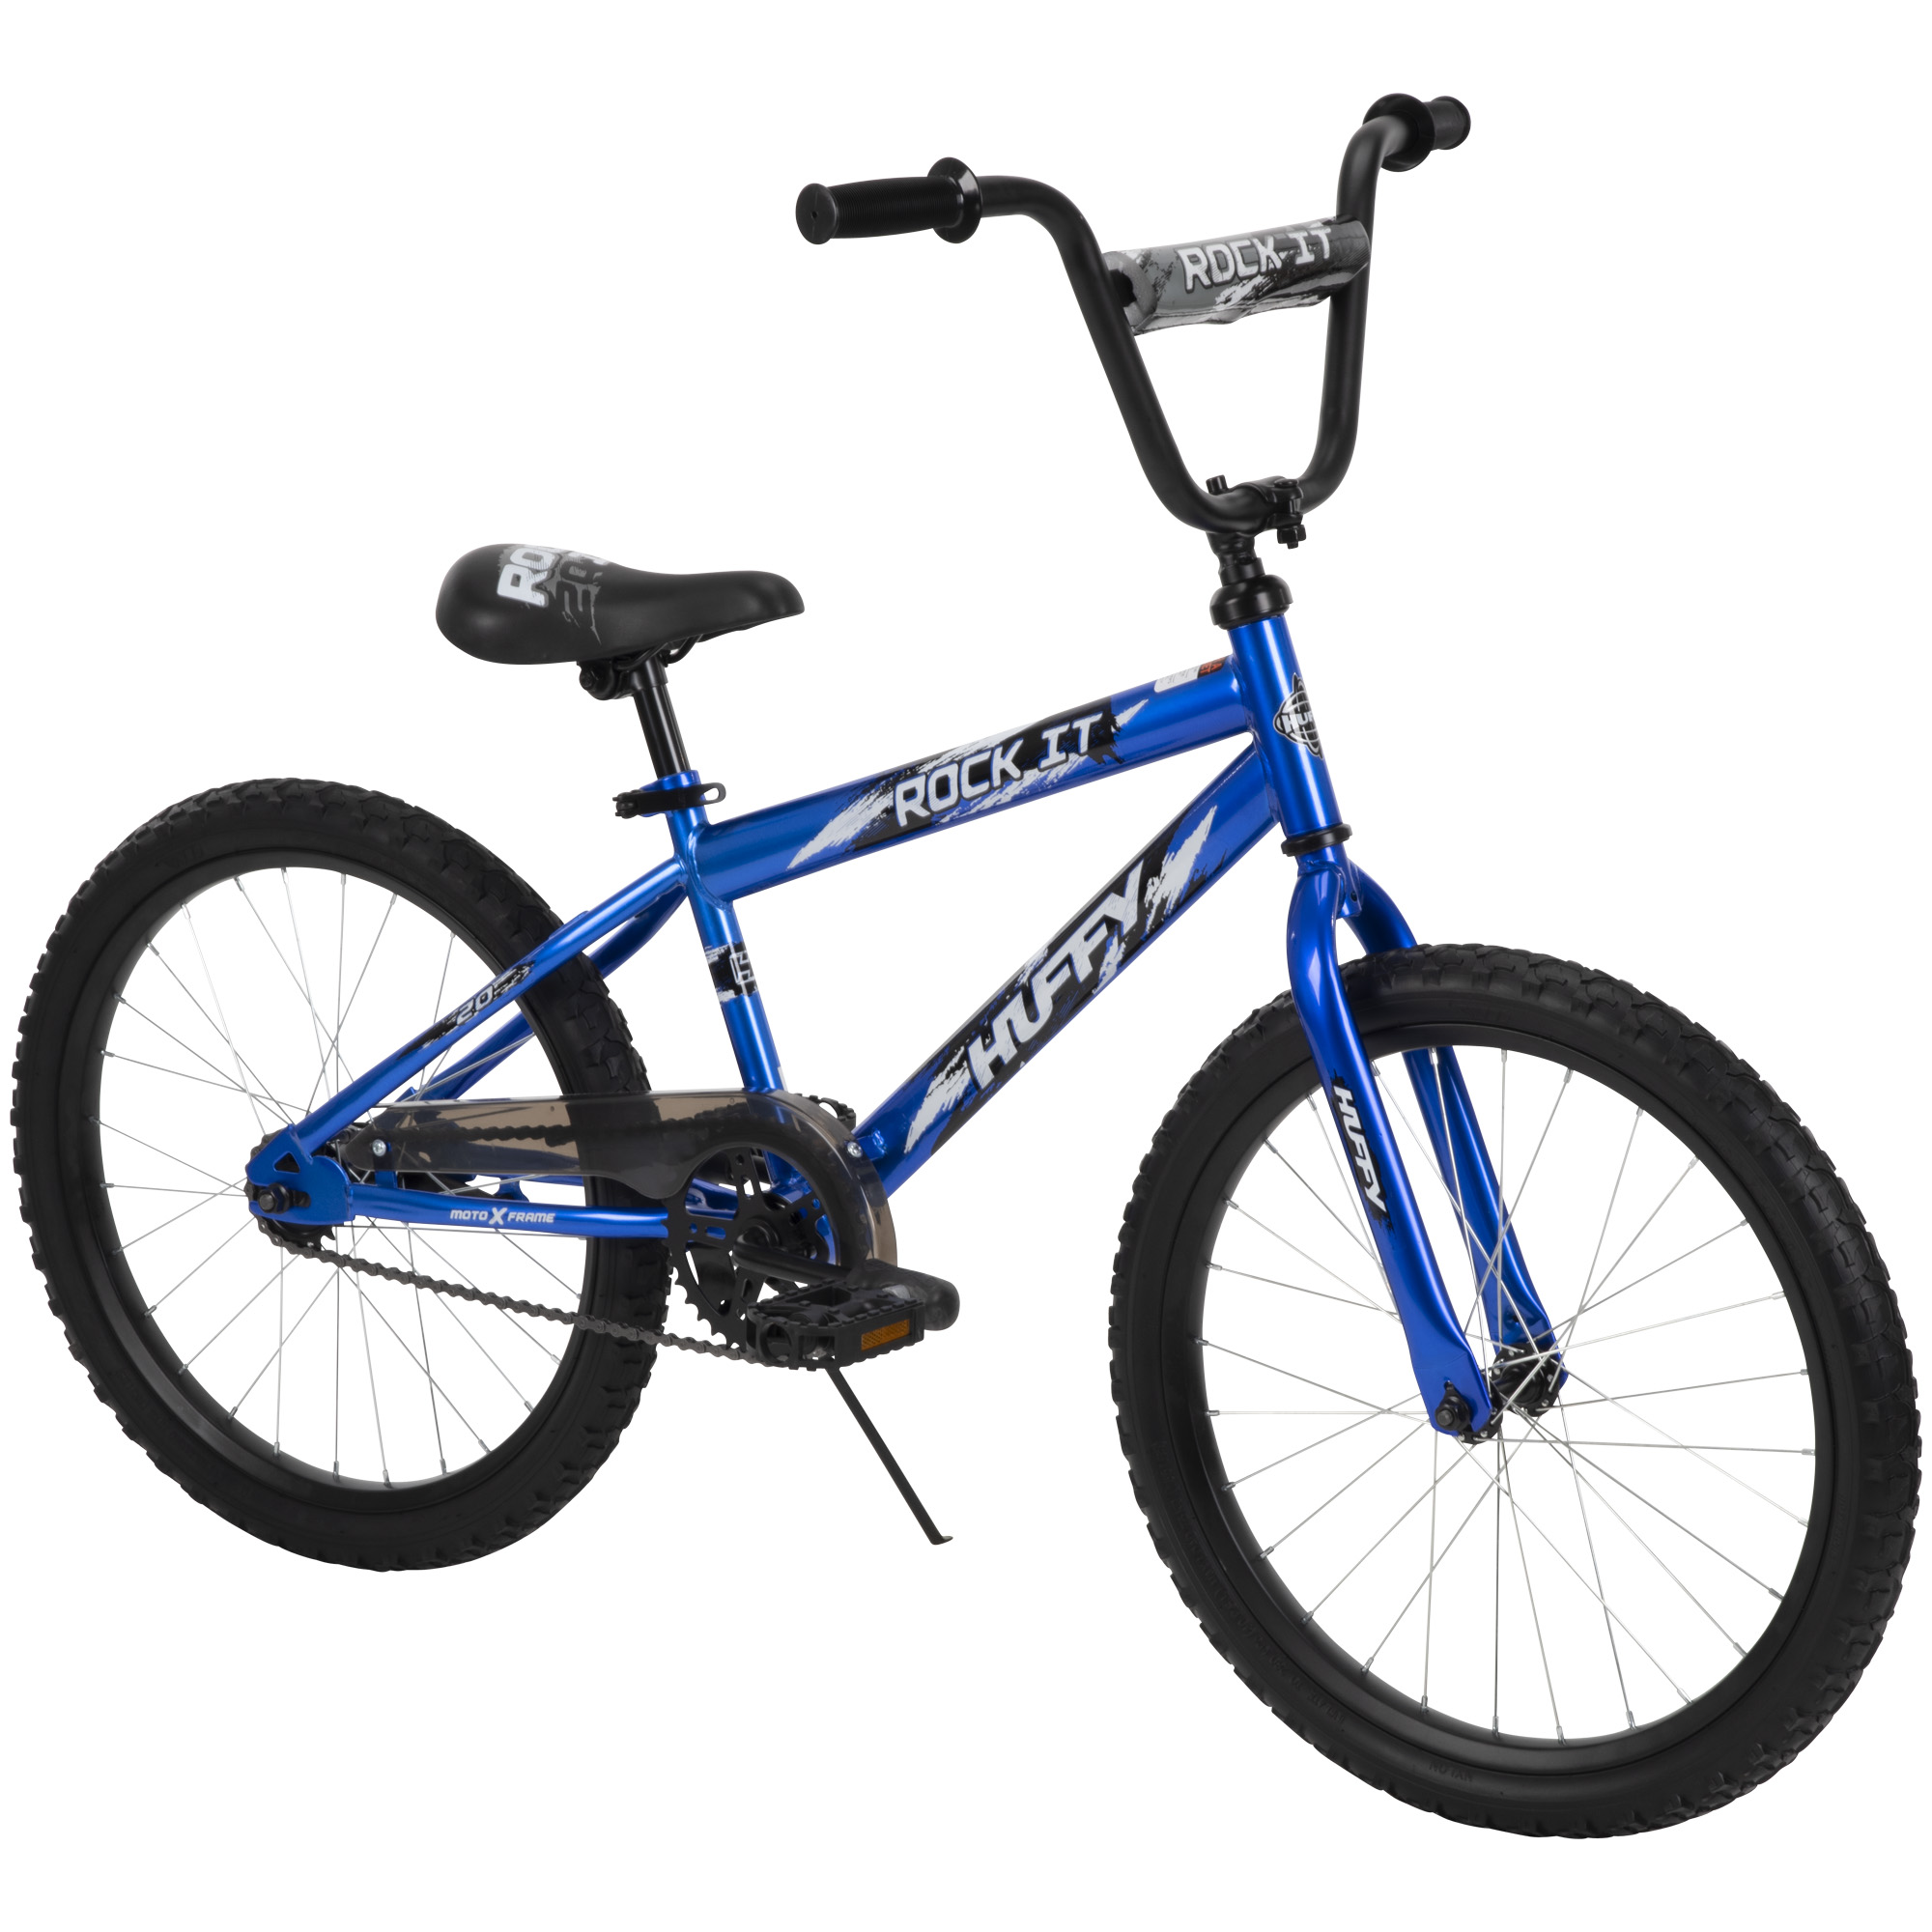 Huffy 20 in. Rock It Kids Bike for Boys Ages 5 and up, Child, Royal Blue - image 3 of 11